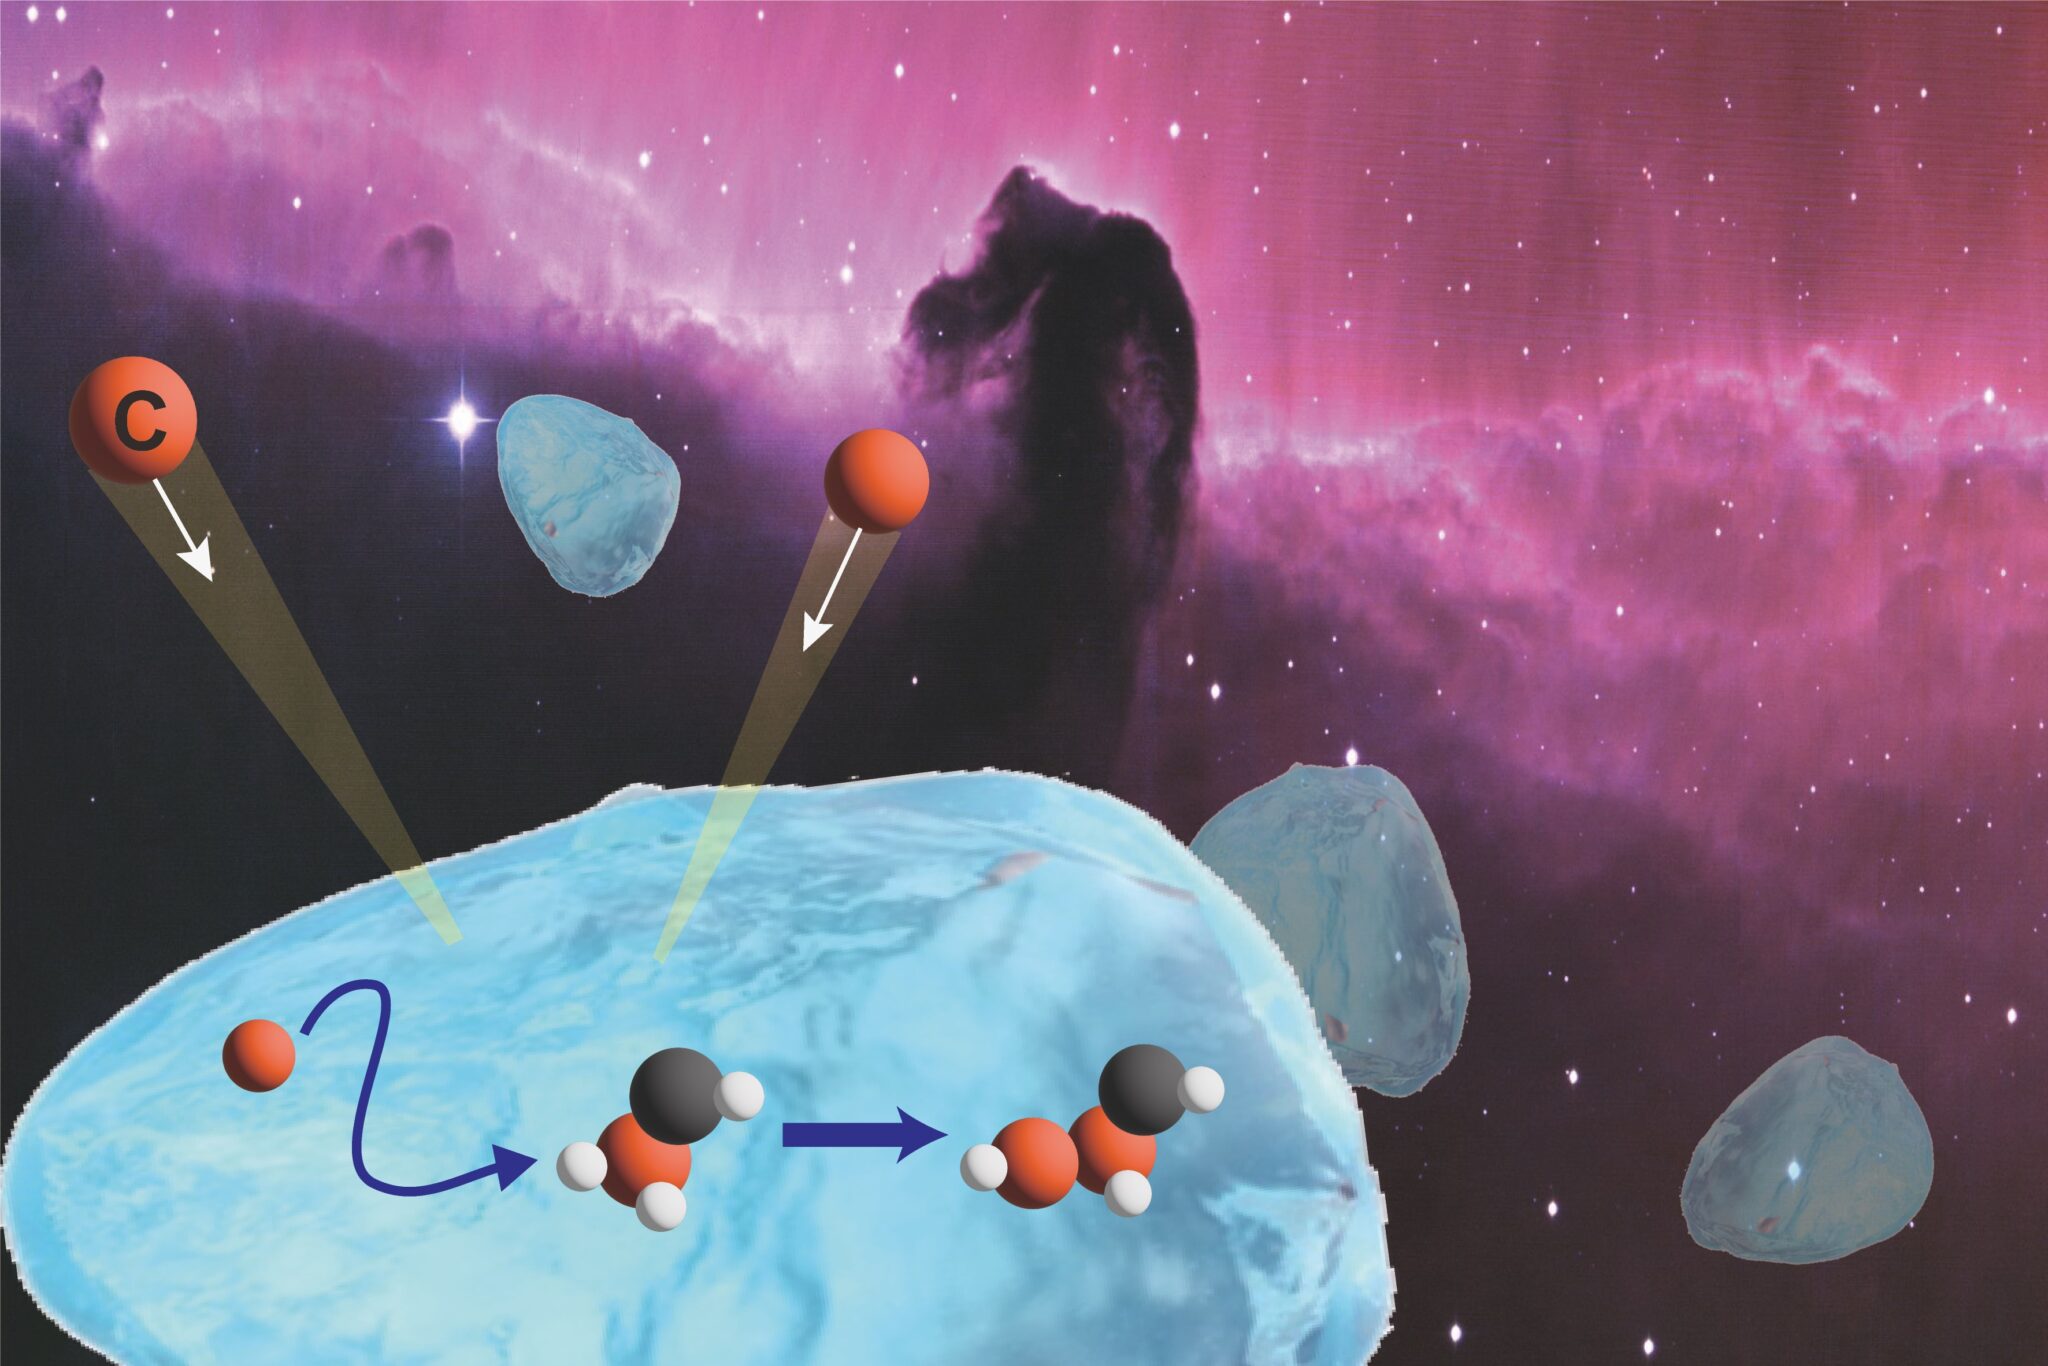 An artistic depiction of the formation of organic compounds on interstellar ice